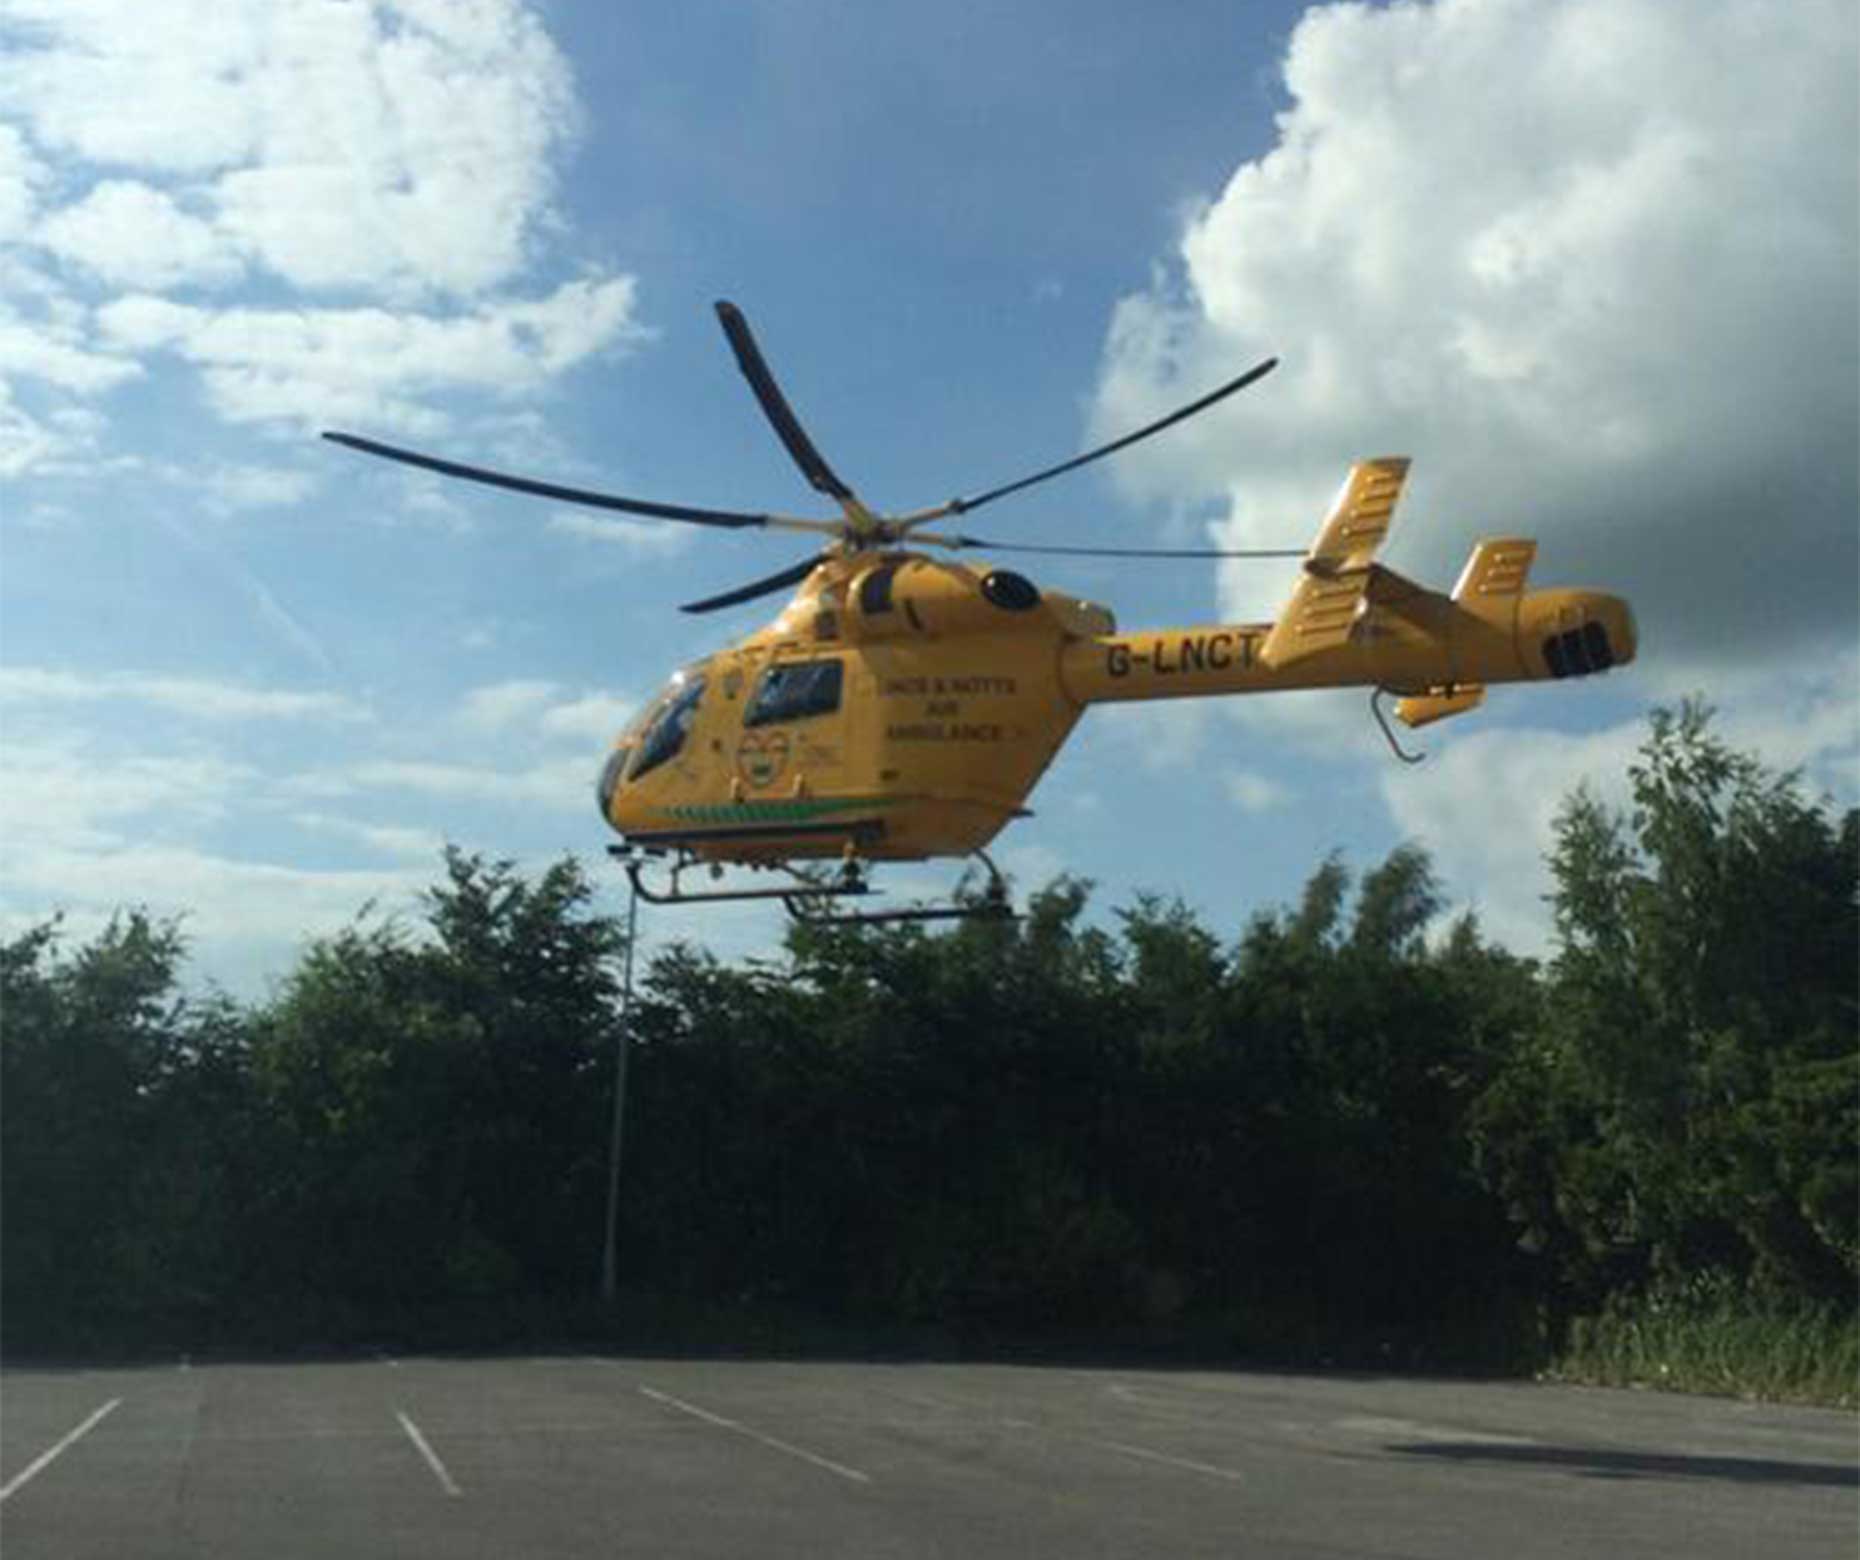 The seriously injured biker was airlifted to hospital in Nottingham for treatment. Photo: @Jamesh87uk